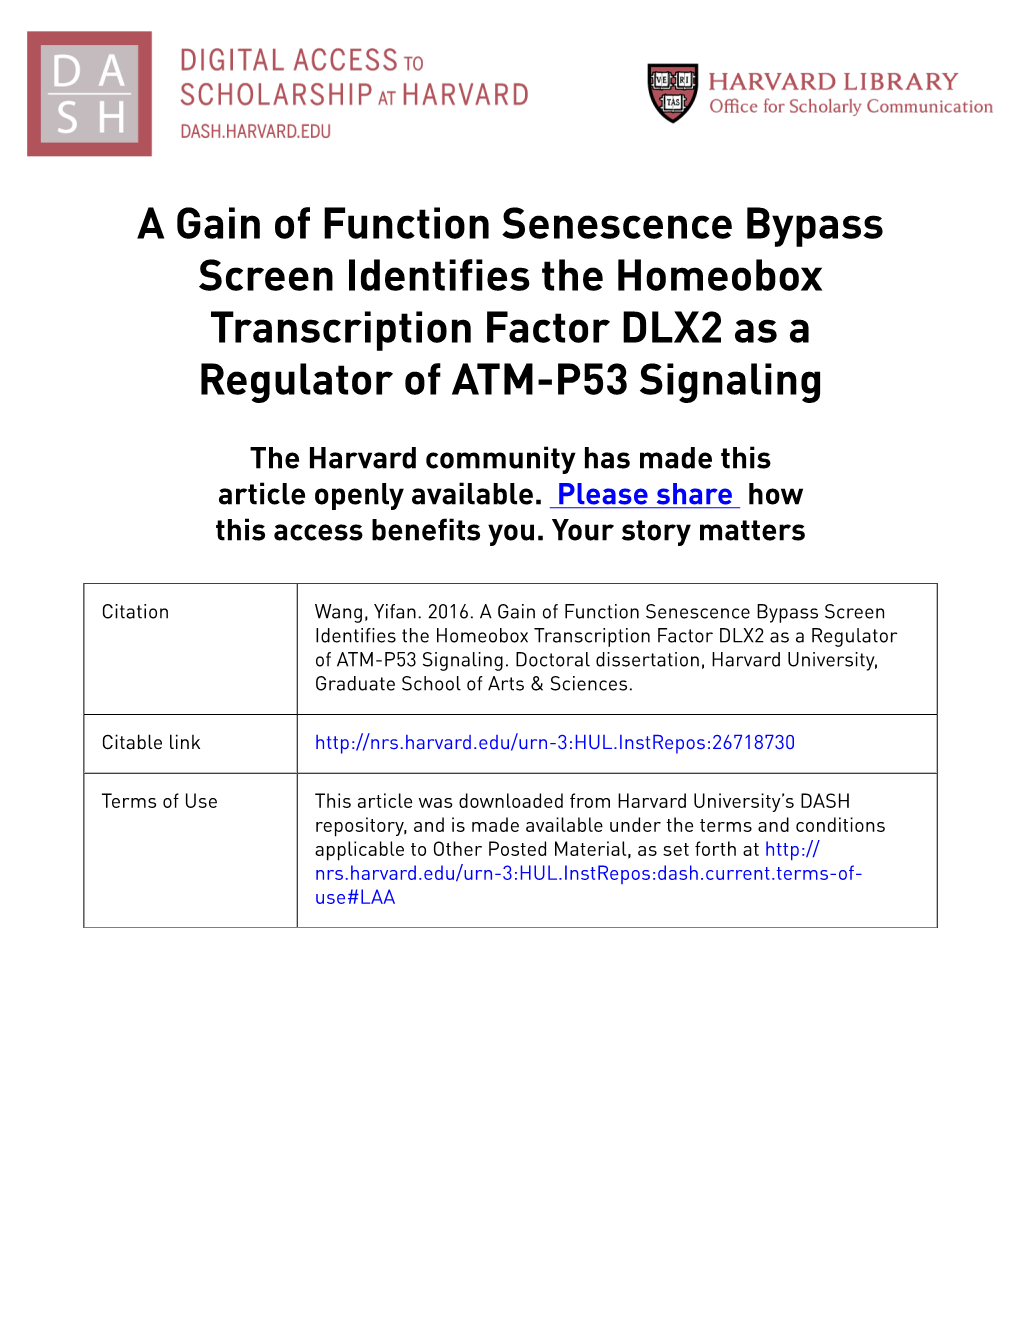 A Gain of Function Senescence Bypass Screen Identifies the Homeobox Transcription Factor DLX2 As a Regulator of ATM-P53 Signaling